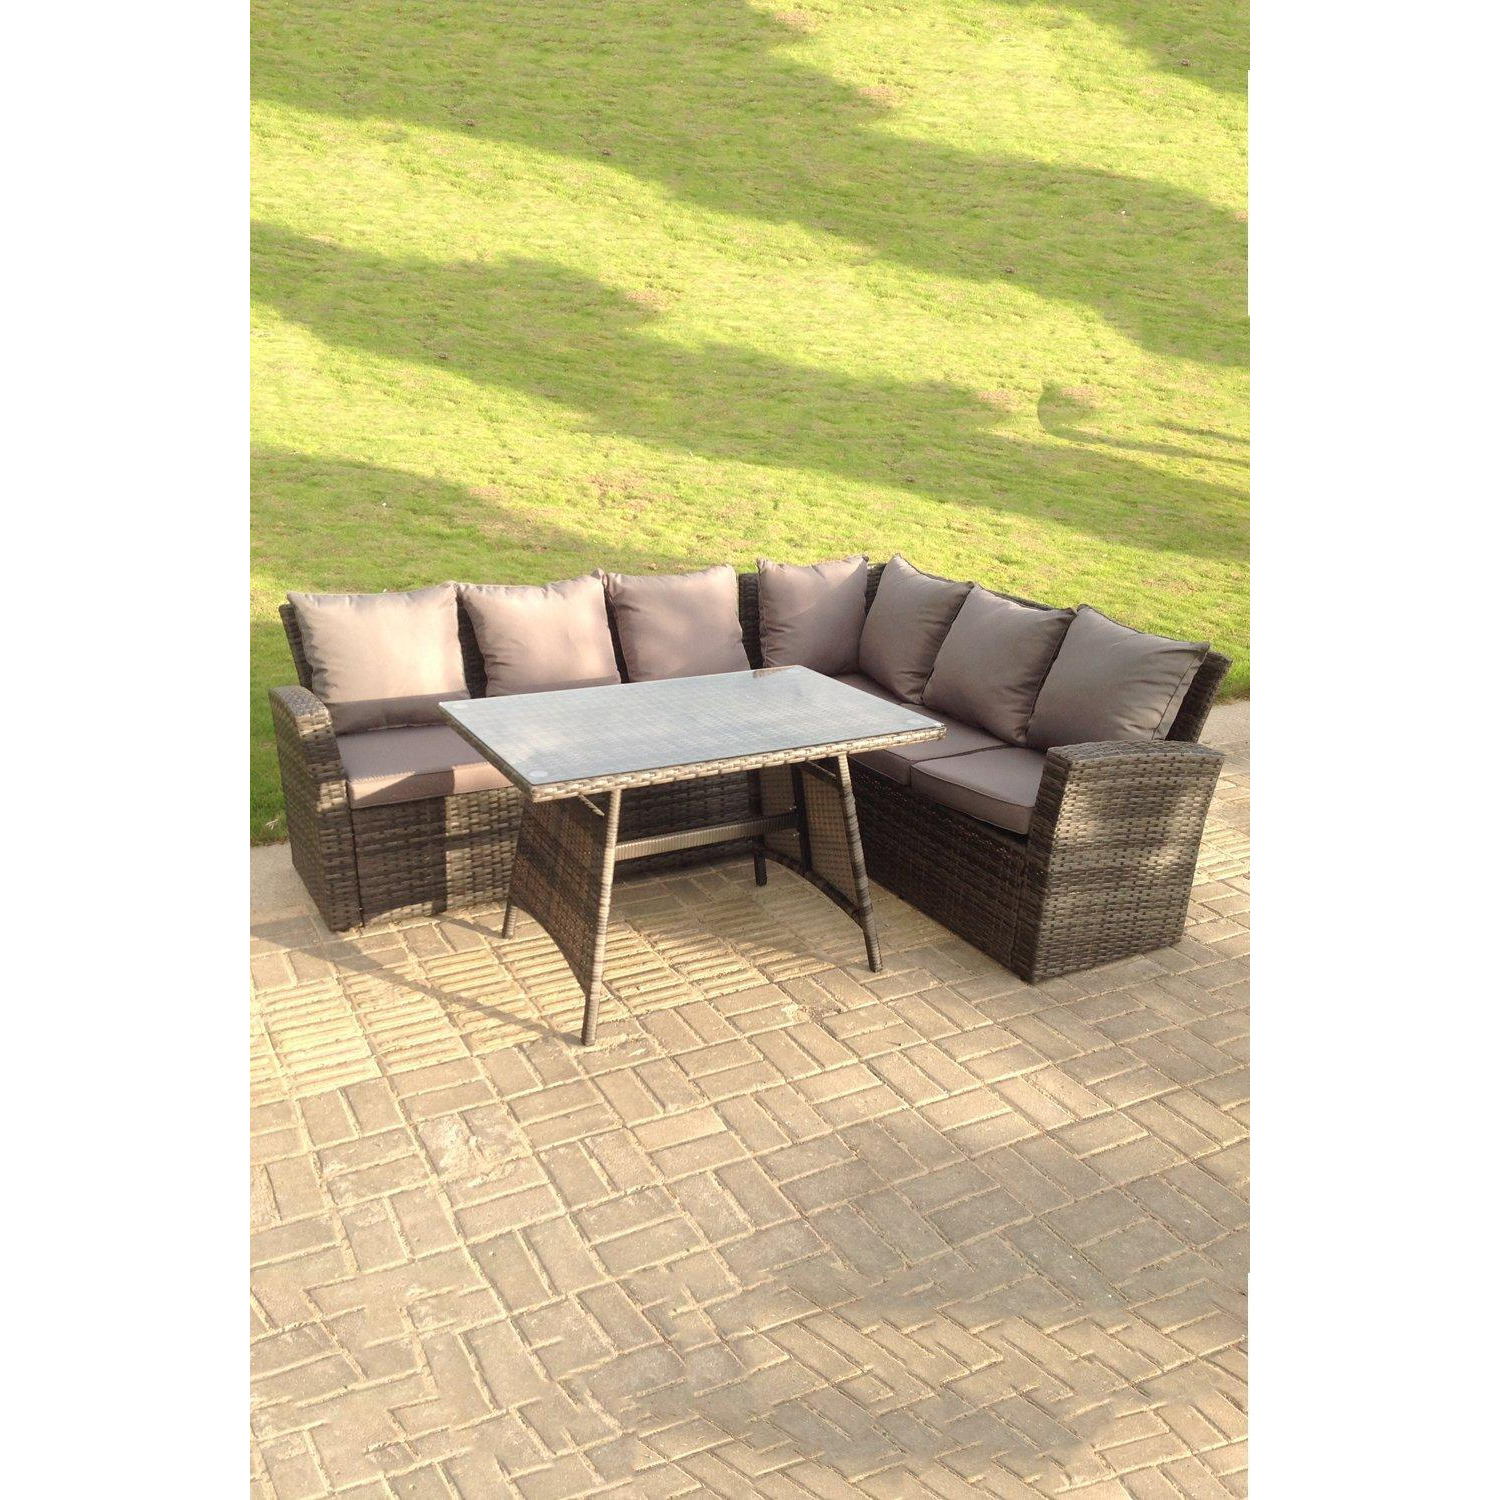 High Back Outdoor Rattan Corner Sofa Dining Set Table 6 Seater - image 1